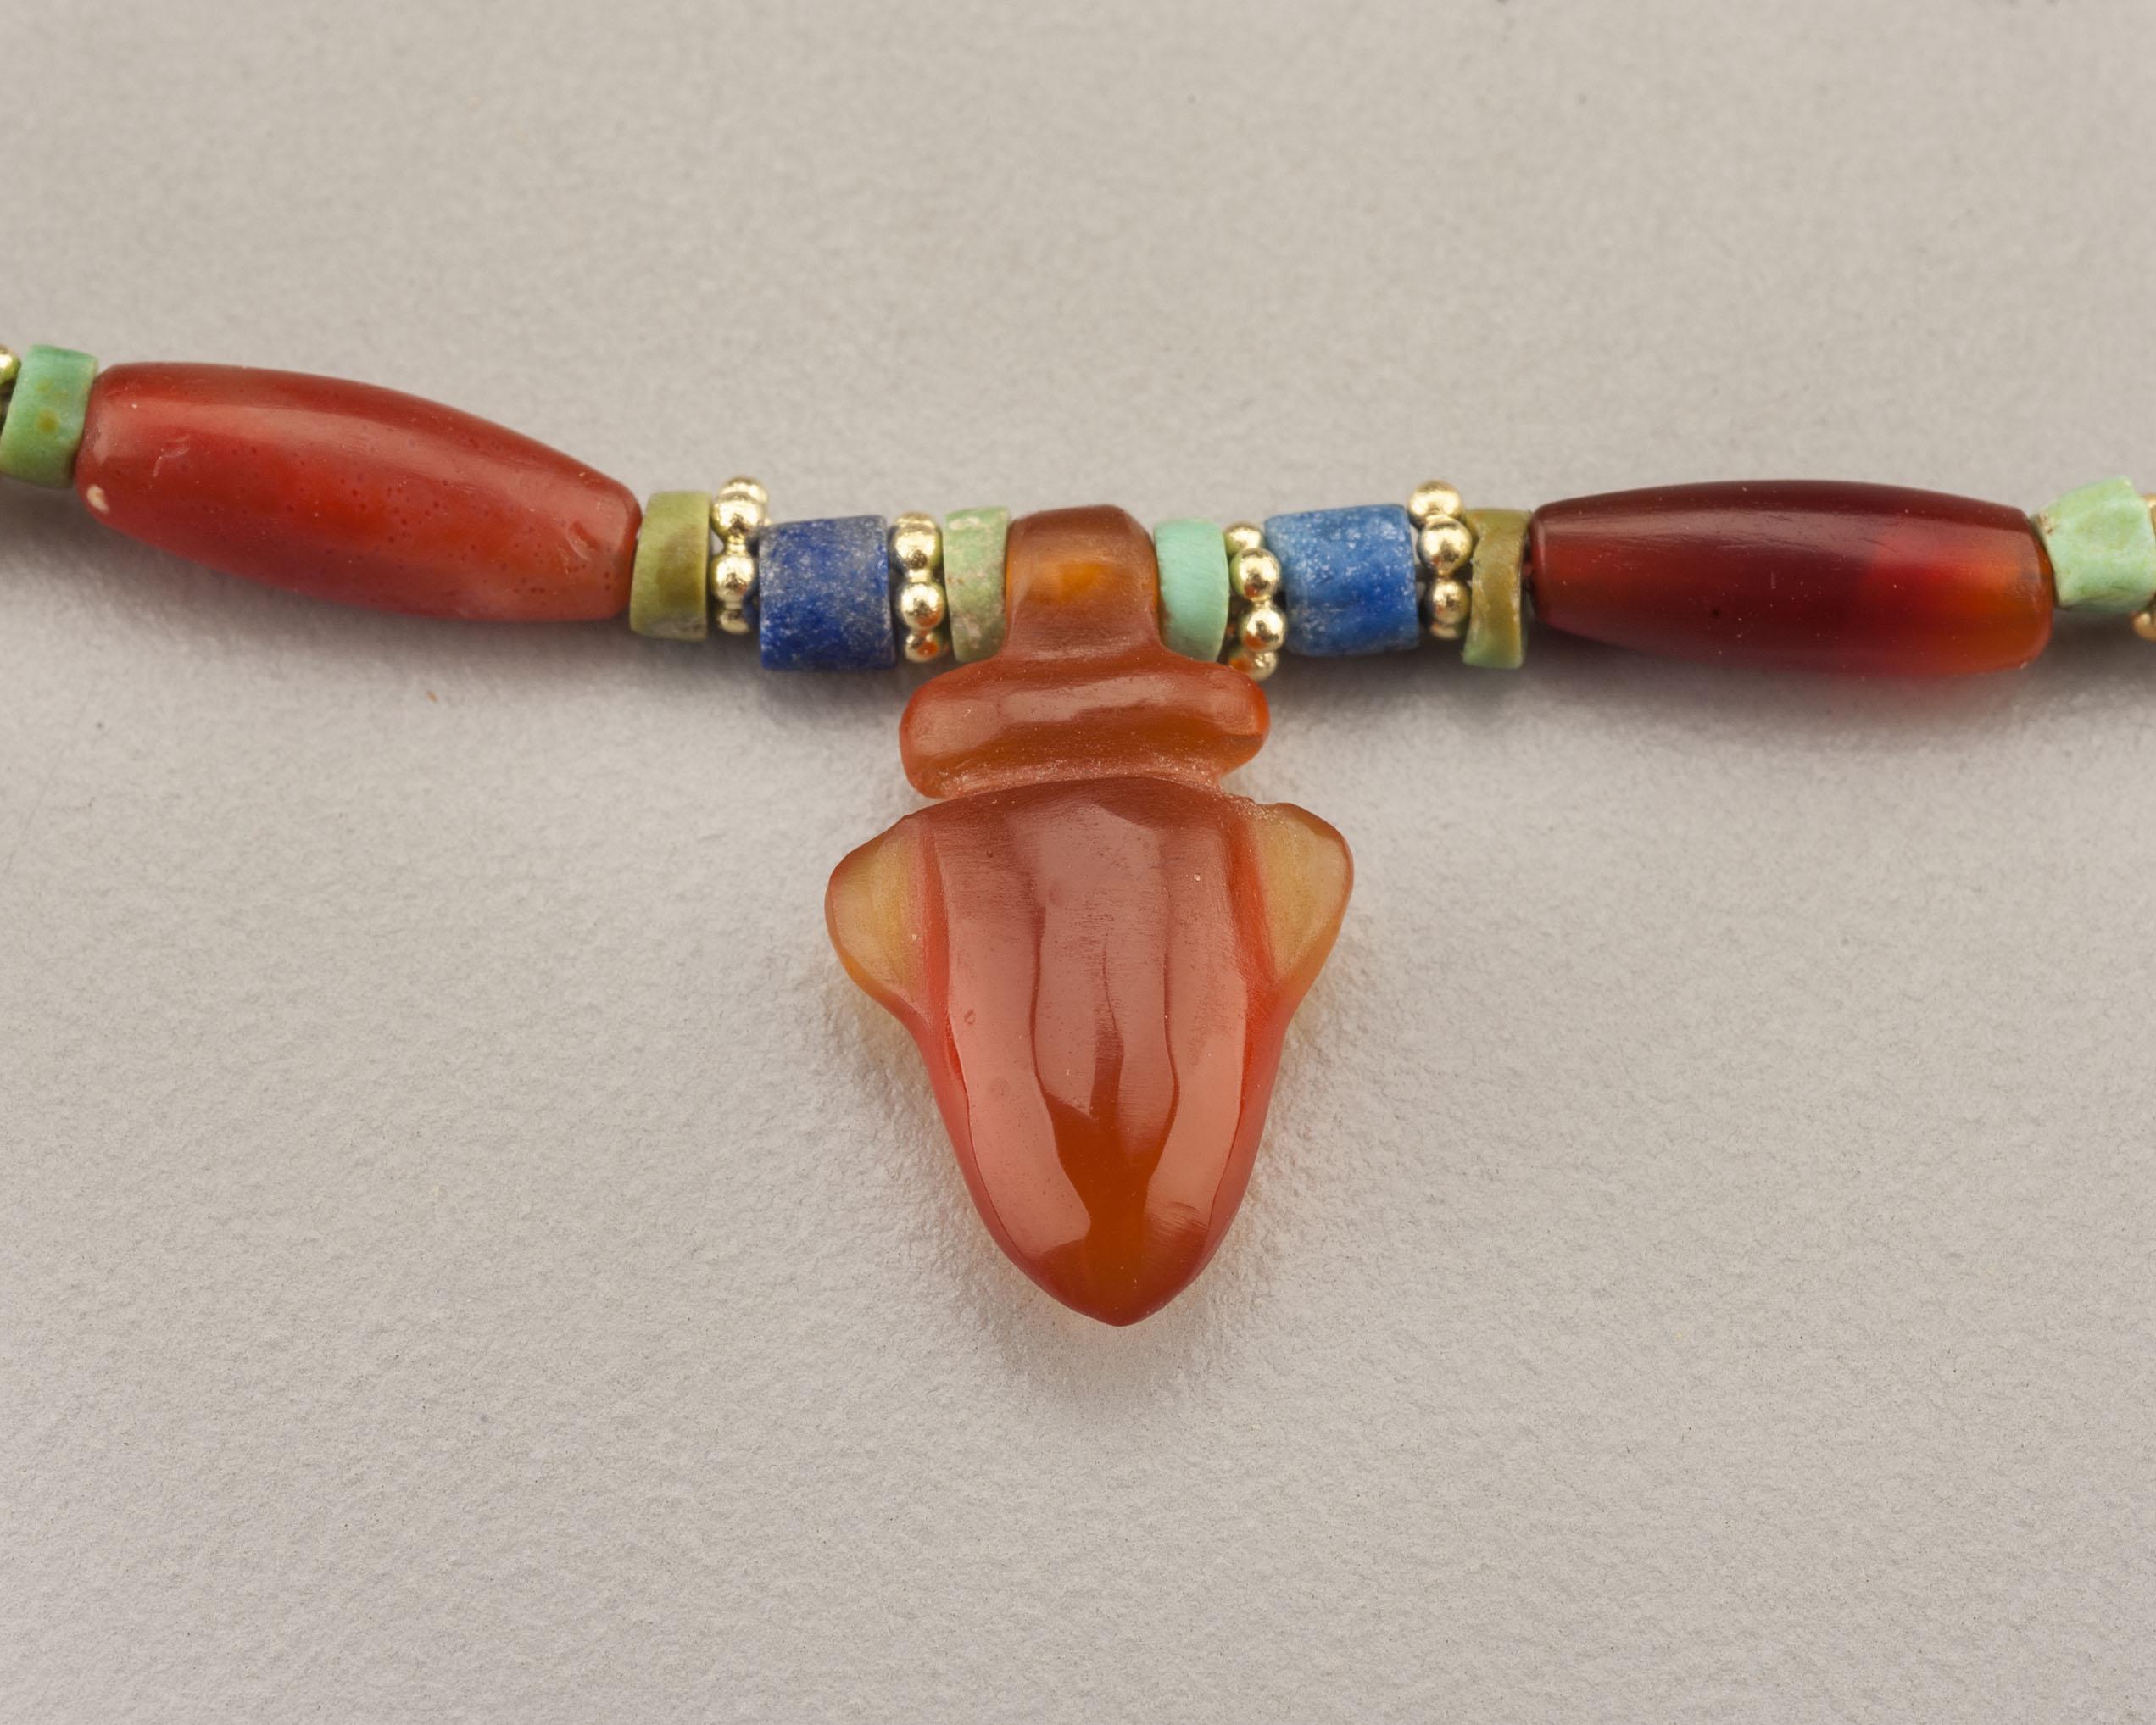 Carnelian, turquoise and lapis lazuli beads with fourteen poppy seed pod pendants and a carnelian heart amulet pendant. The necklace is accented with seventy-two granulated 20k gold ring beads. There are twenty-two carnelian barrel beads alternating